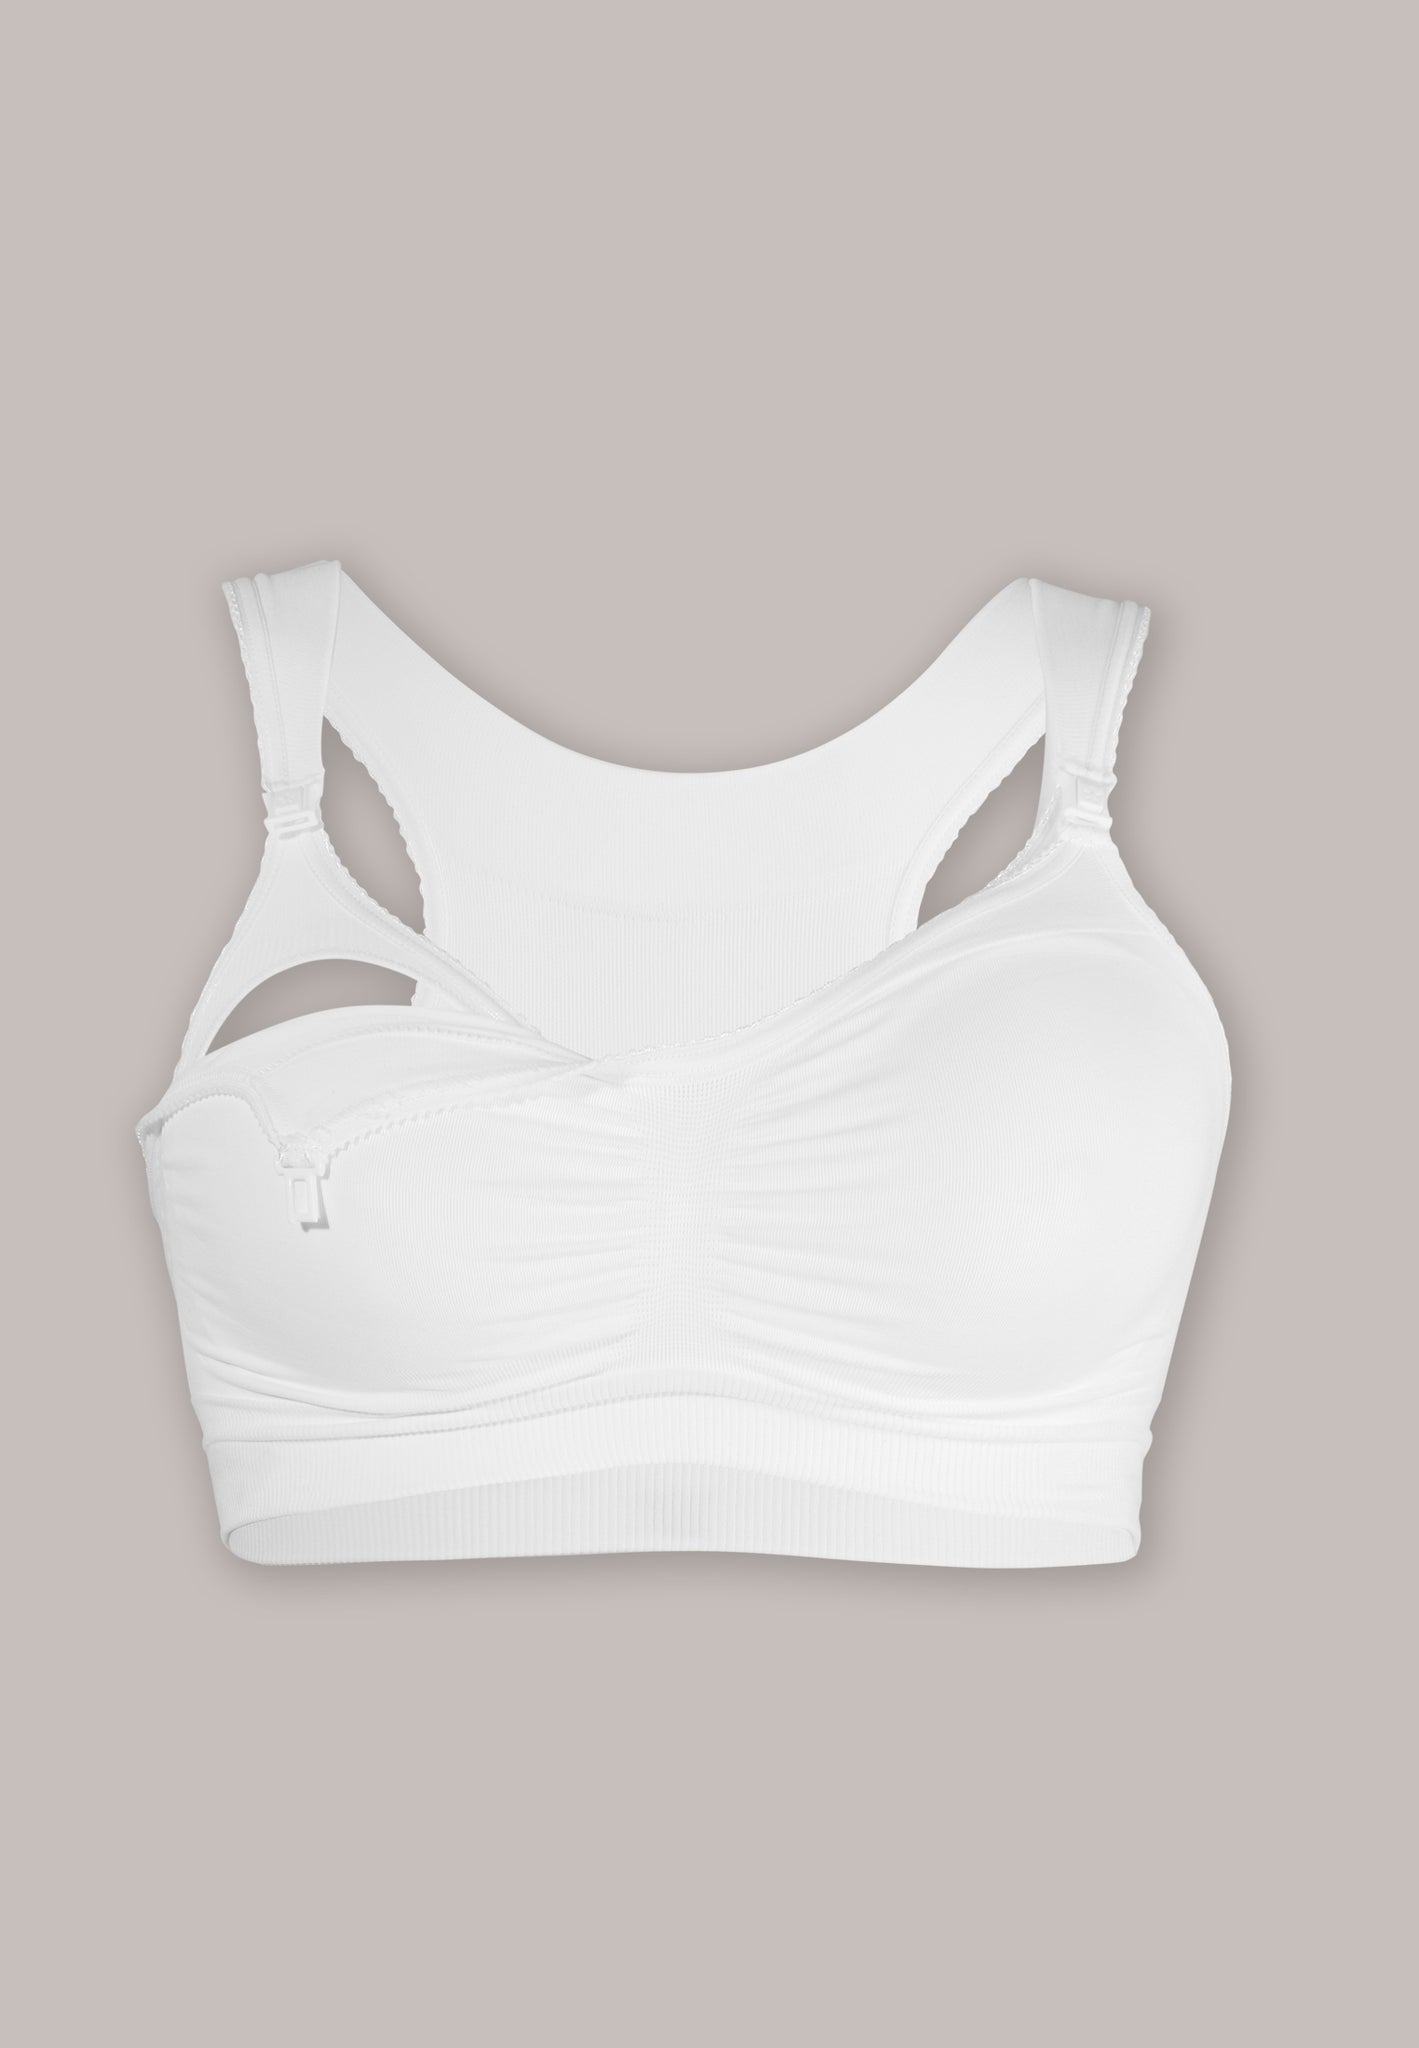 Carriwell White Seamless Drop Cup Maternity And Nursing Bra Large